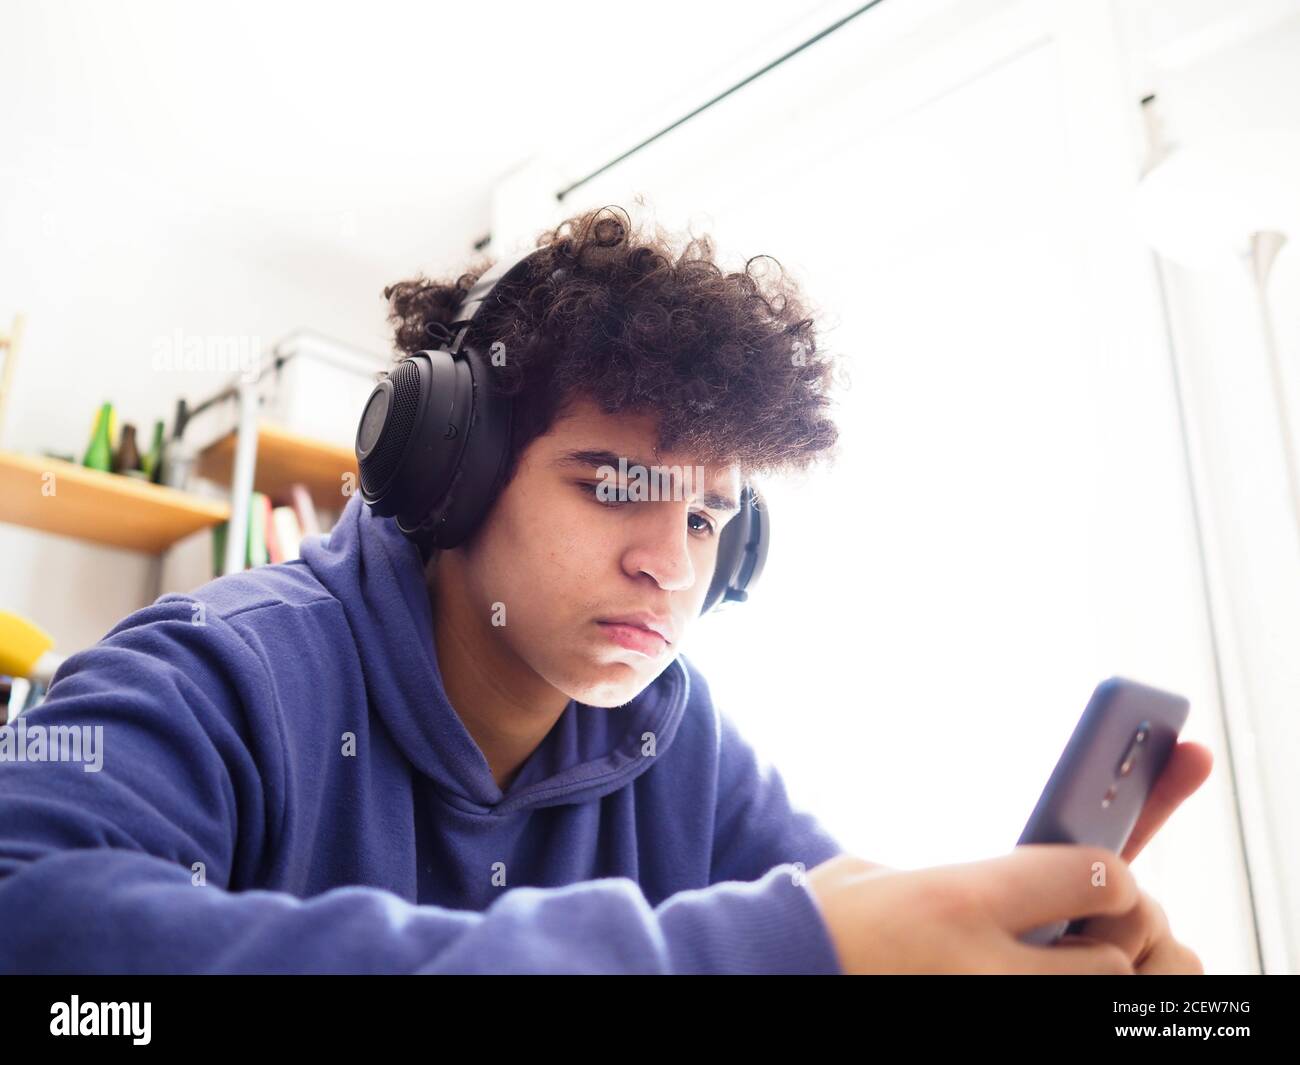 Curly young male in a purple hoodie and headphones using his phone while studying Stock Photo